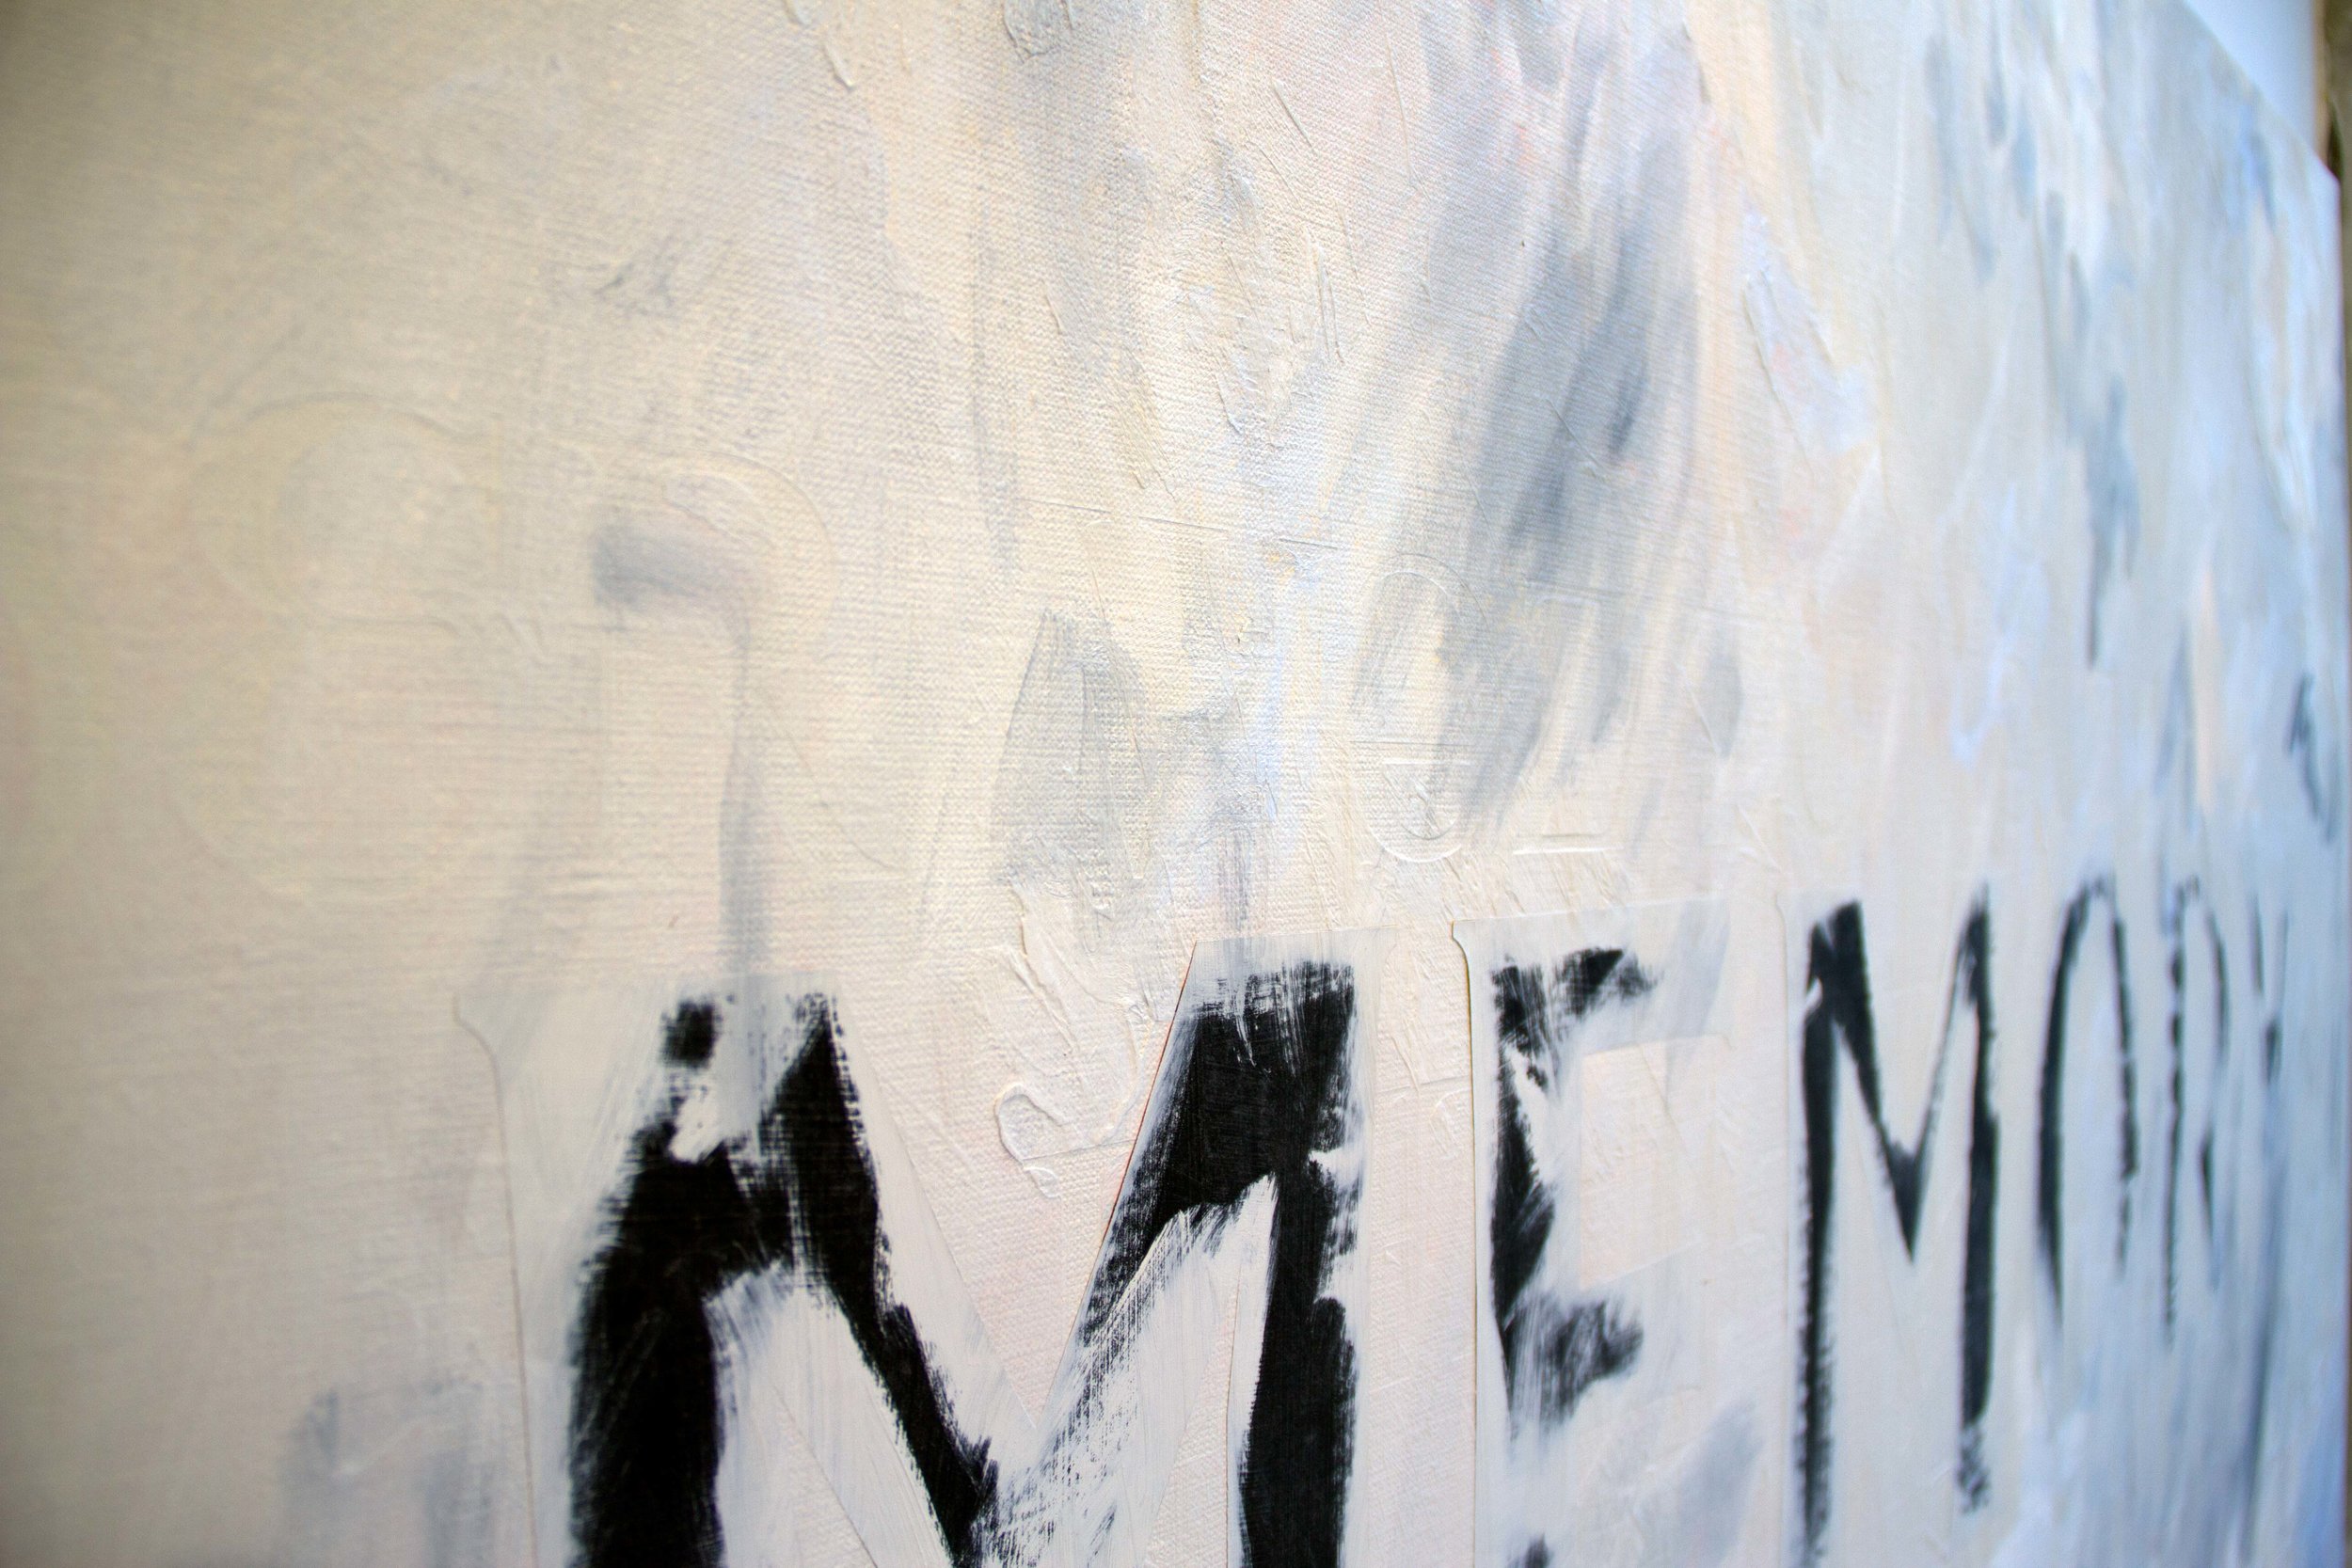 A Memory (of how we live today), 2011-17, oil and vinyl on linen